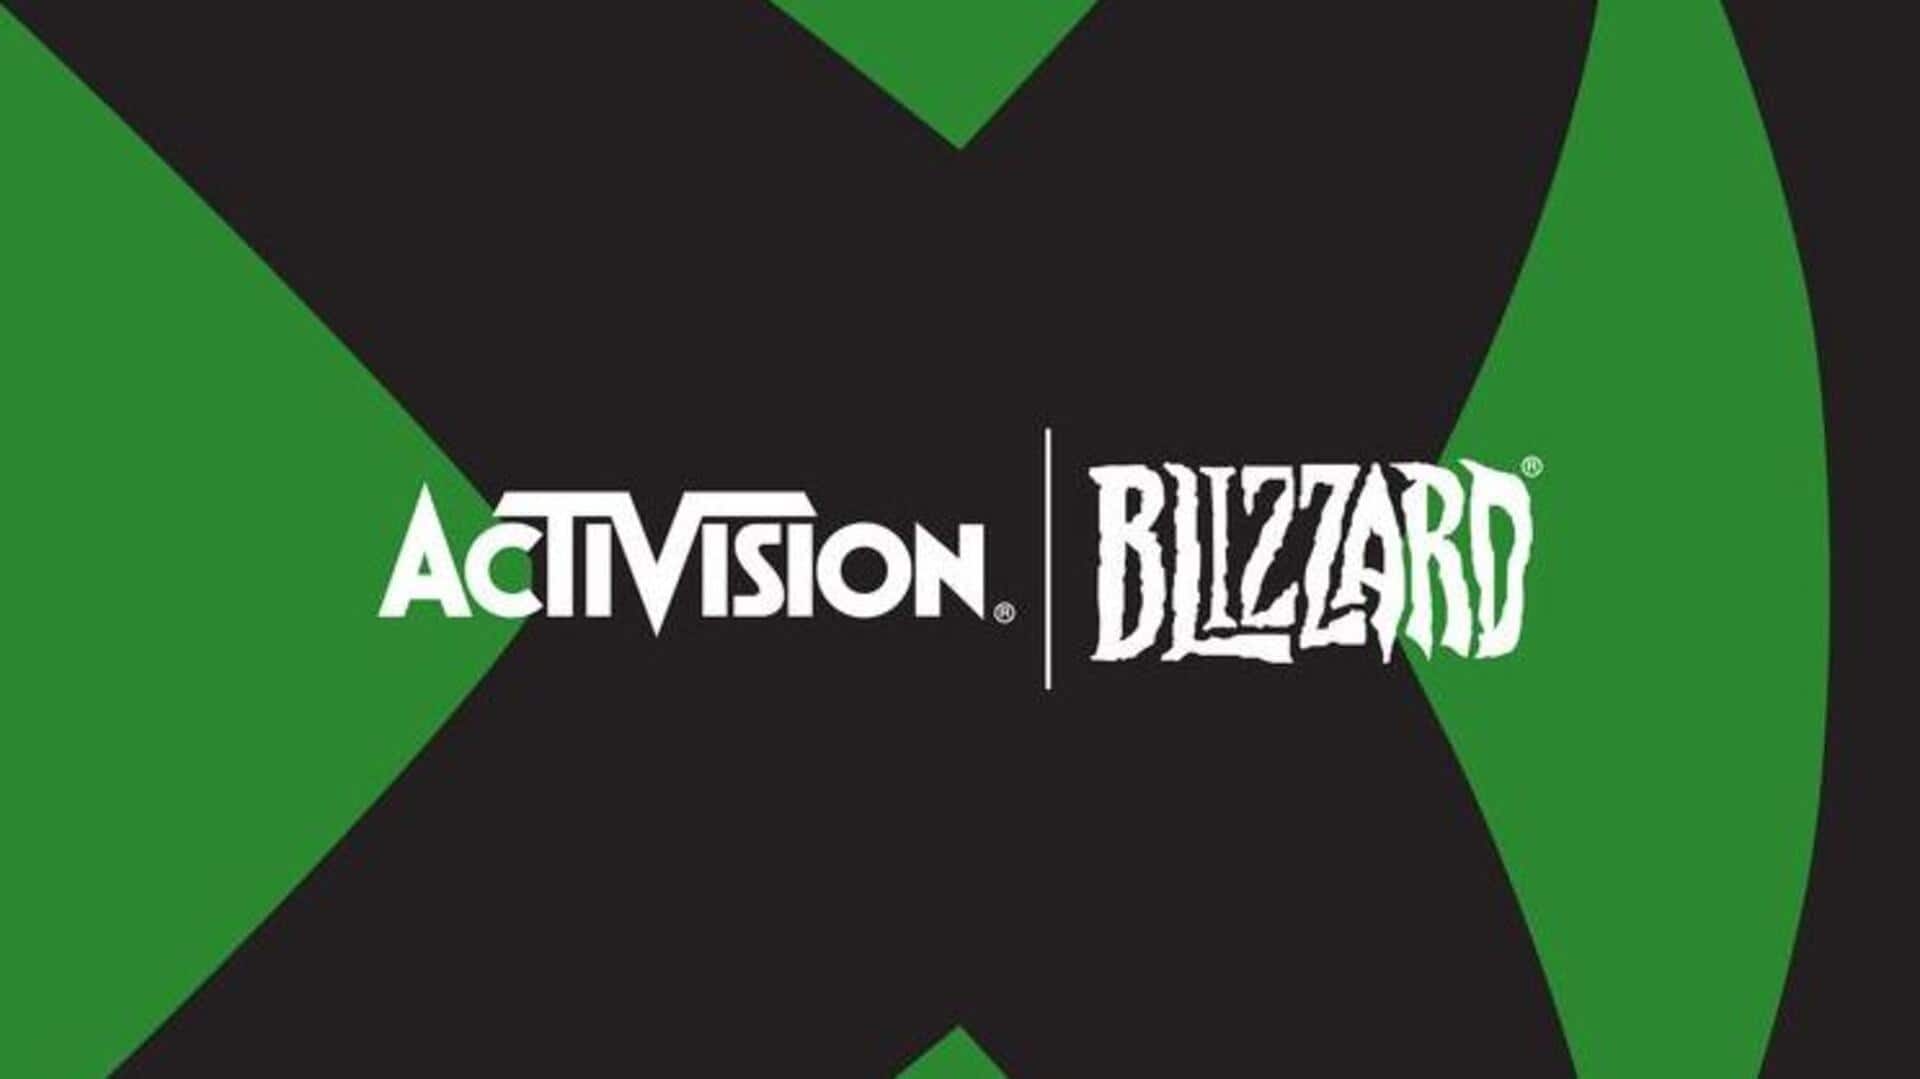 Activision Blizzard's negotiations with Google involved creating own game store